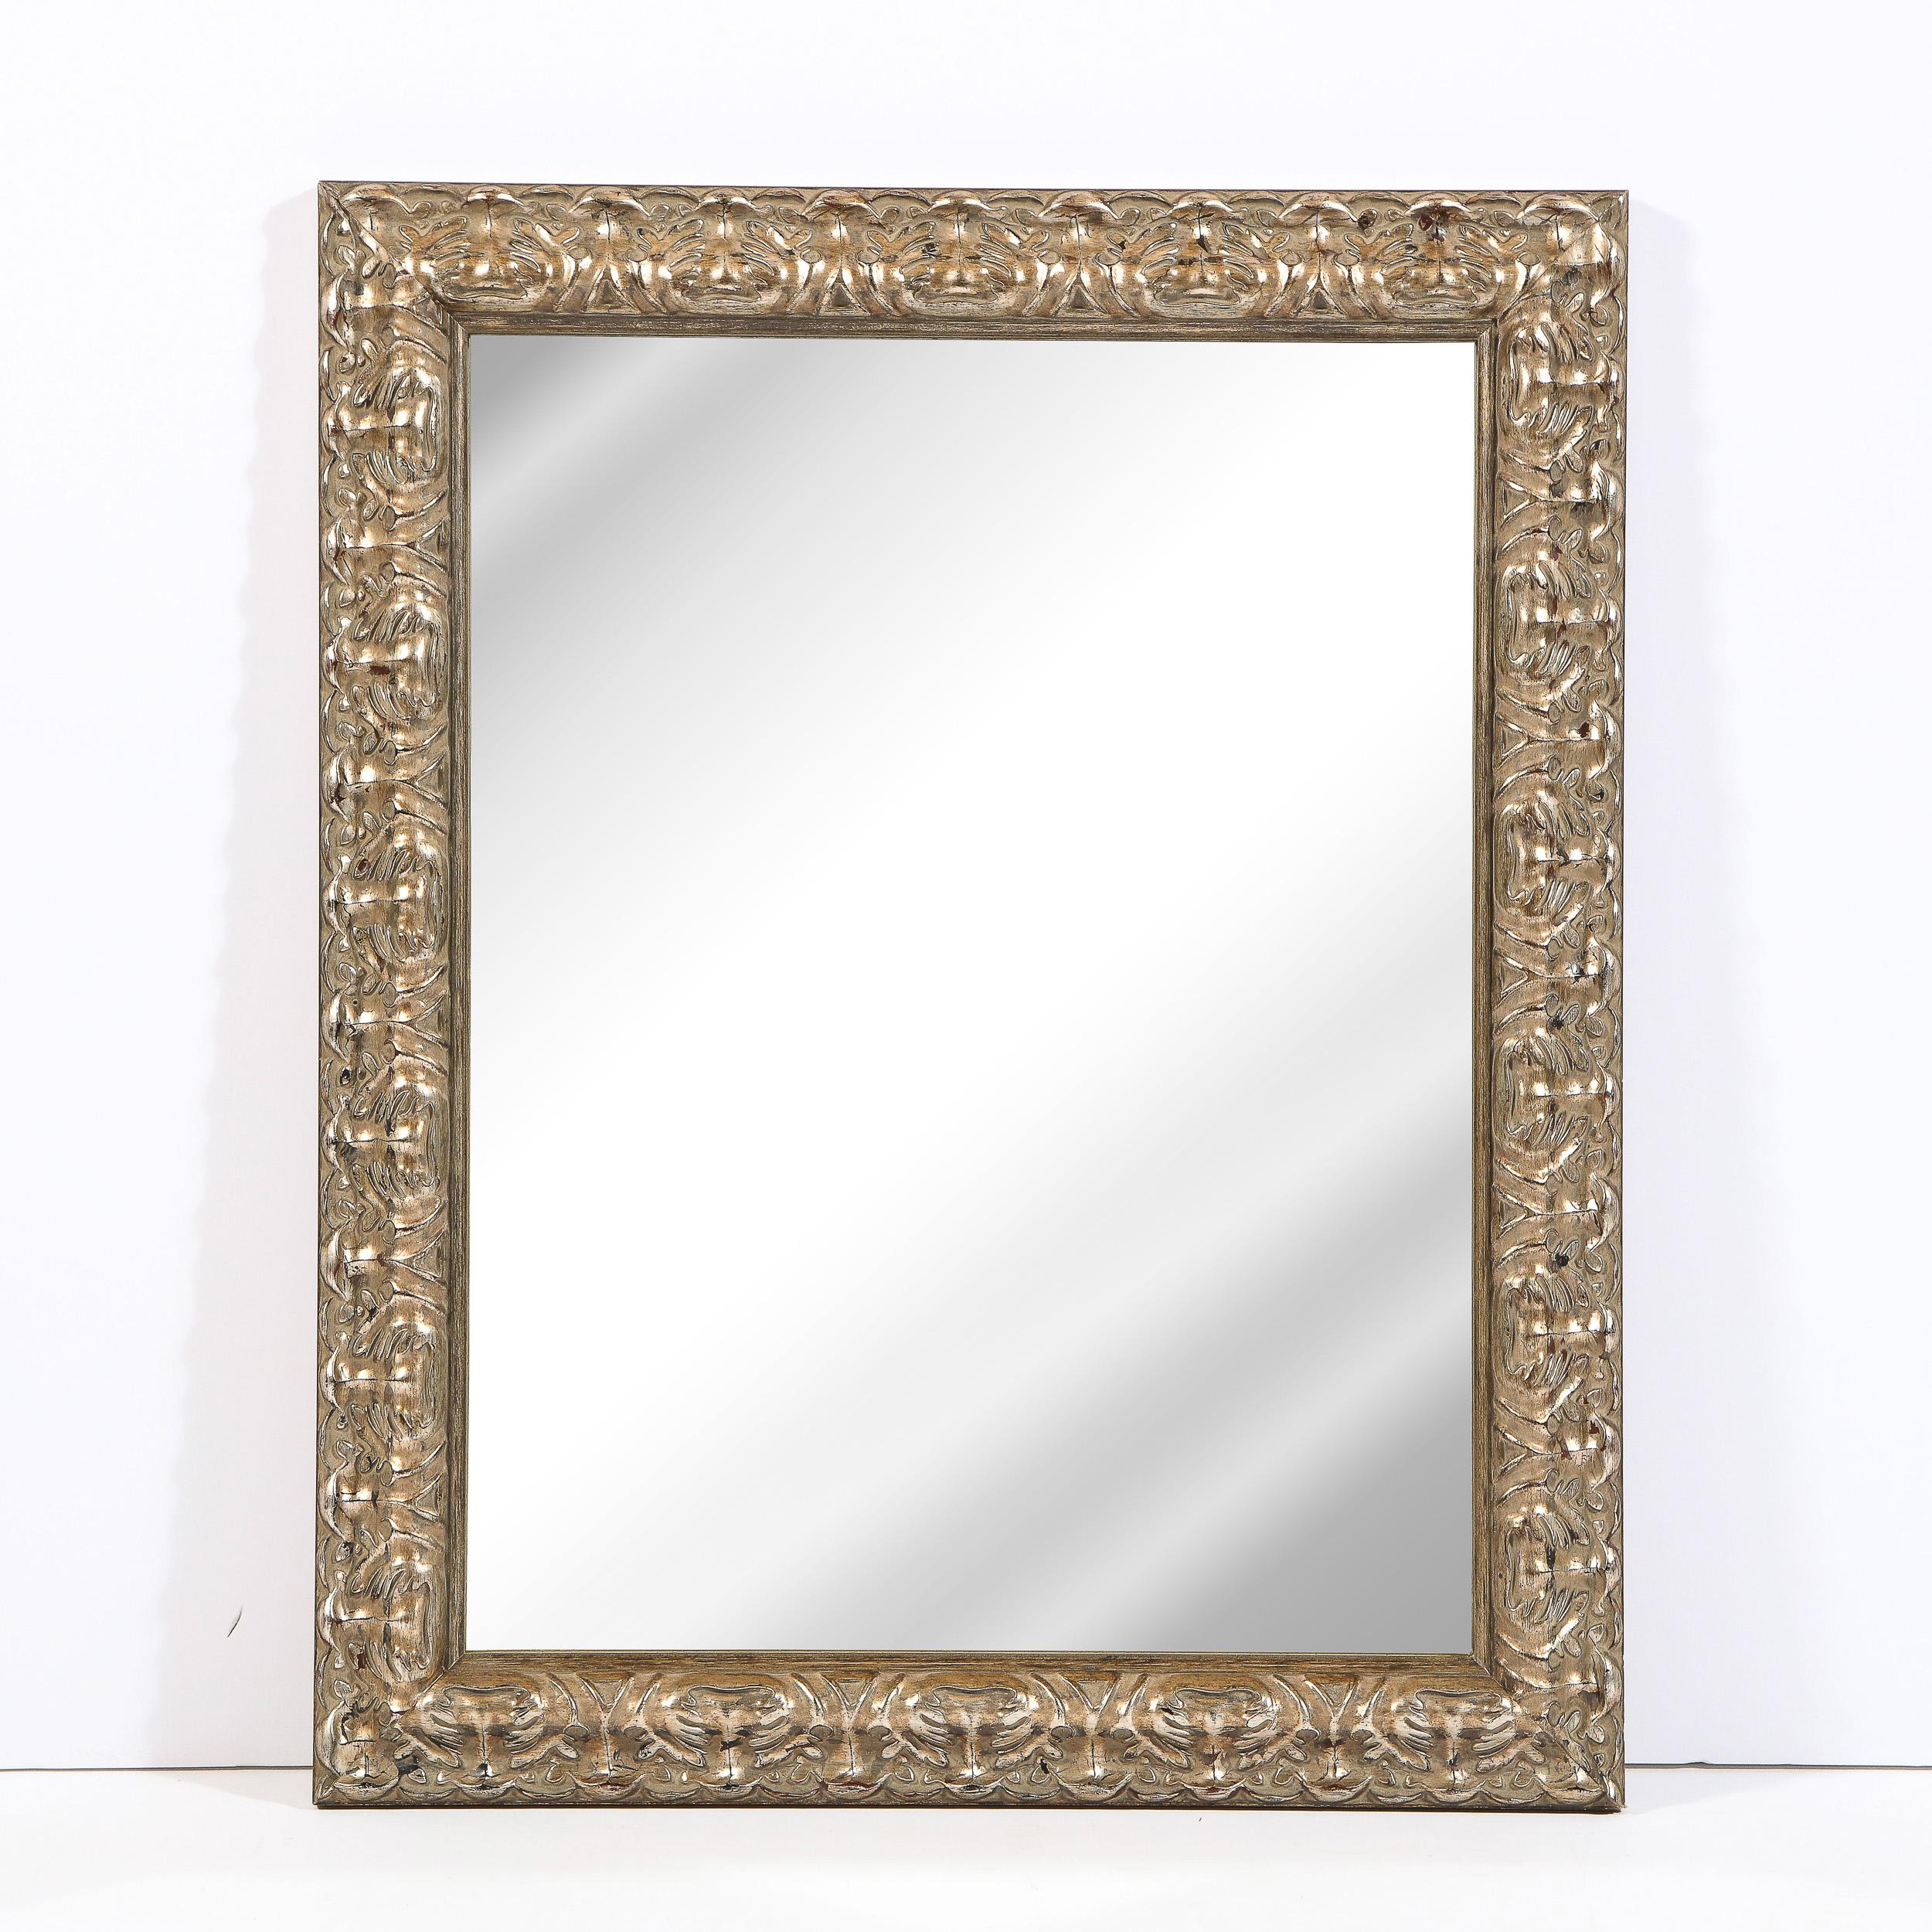 This beautiful modernist mirror was realized in the United States during the 20th century. It features a rectangular frame in giltwood with a wealth of carved abstract stylized foliate designs with a plain mirror center. With its sophisticated